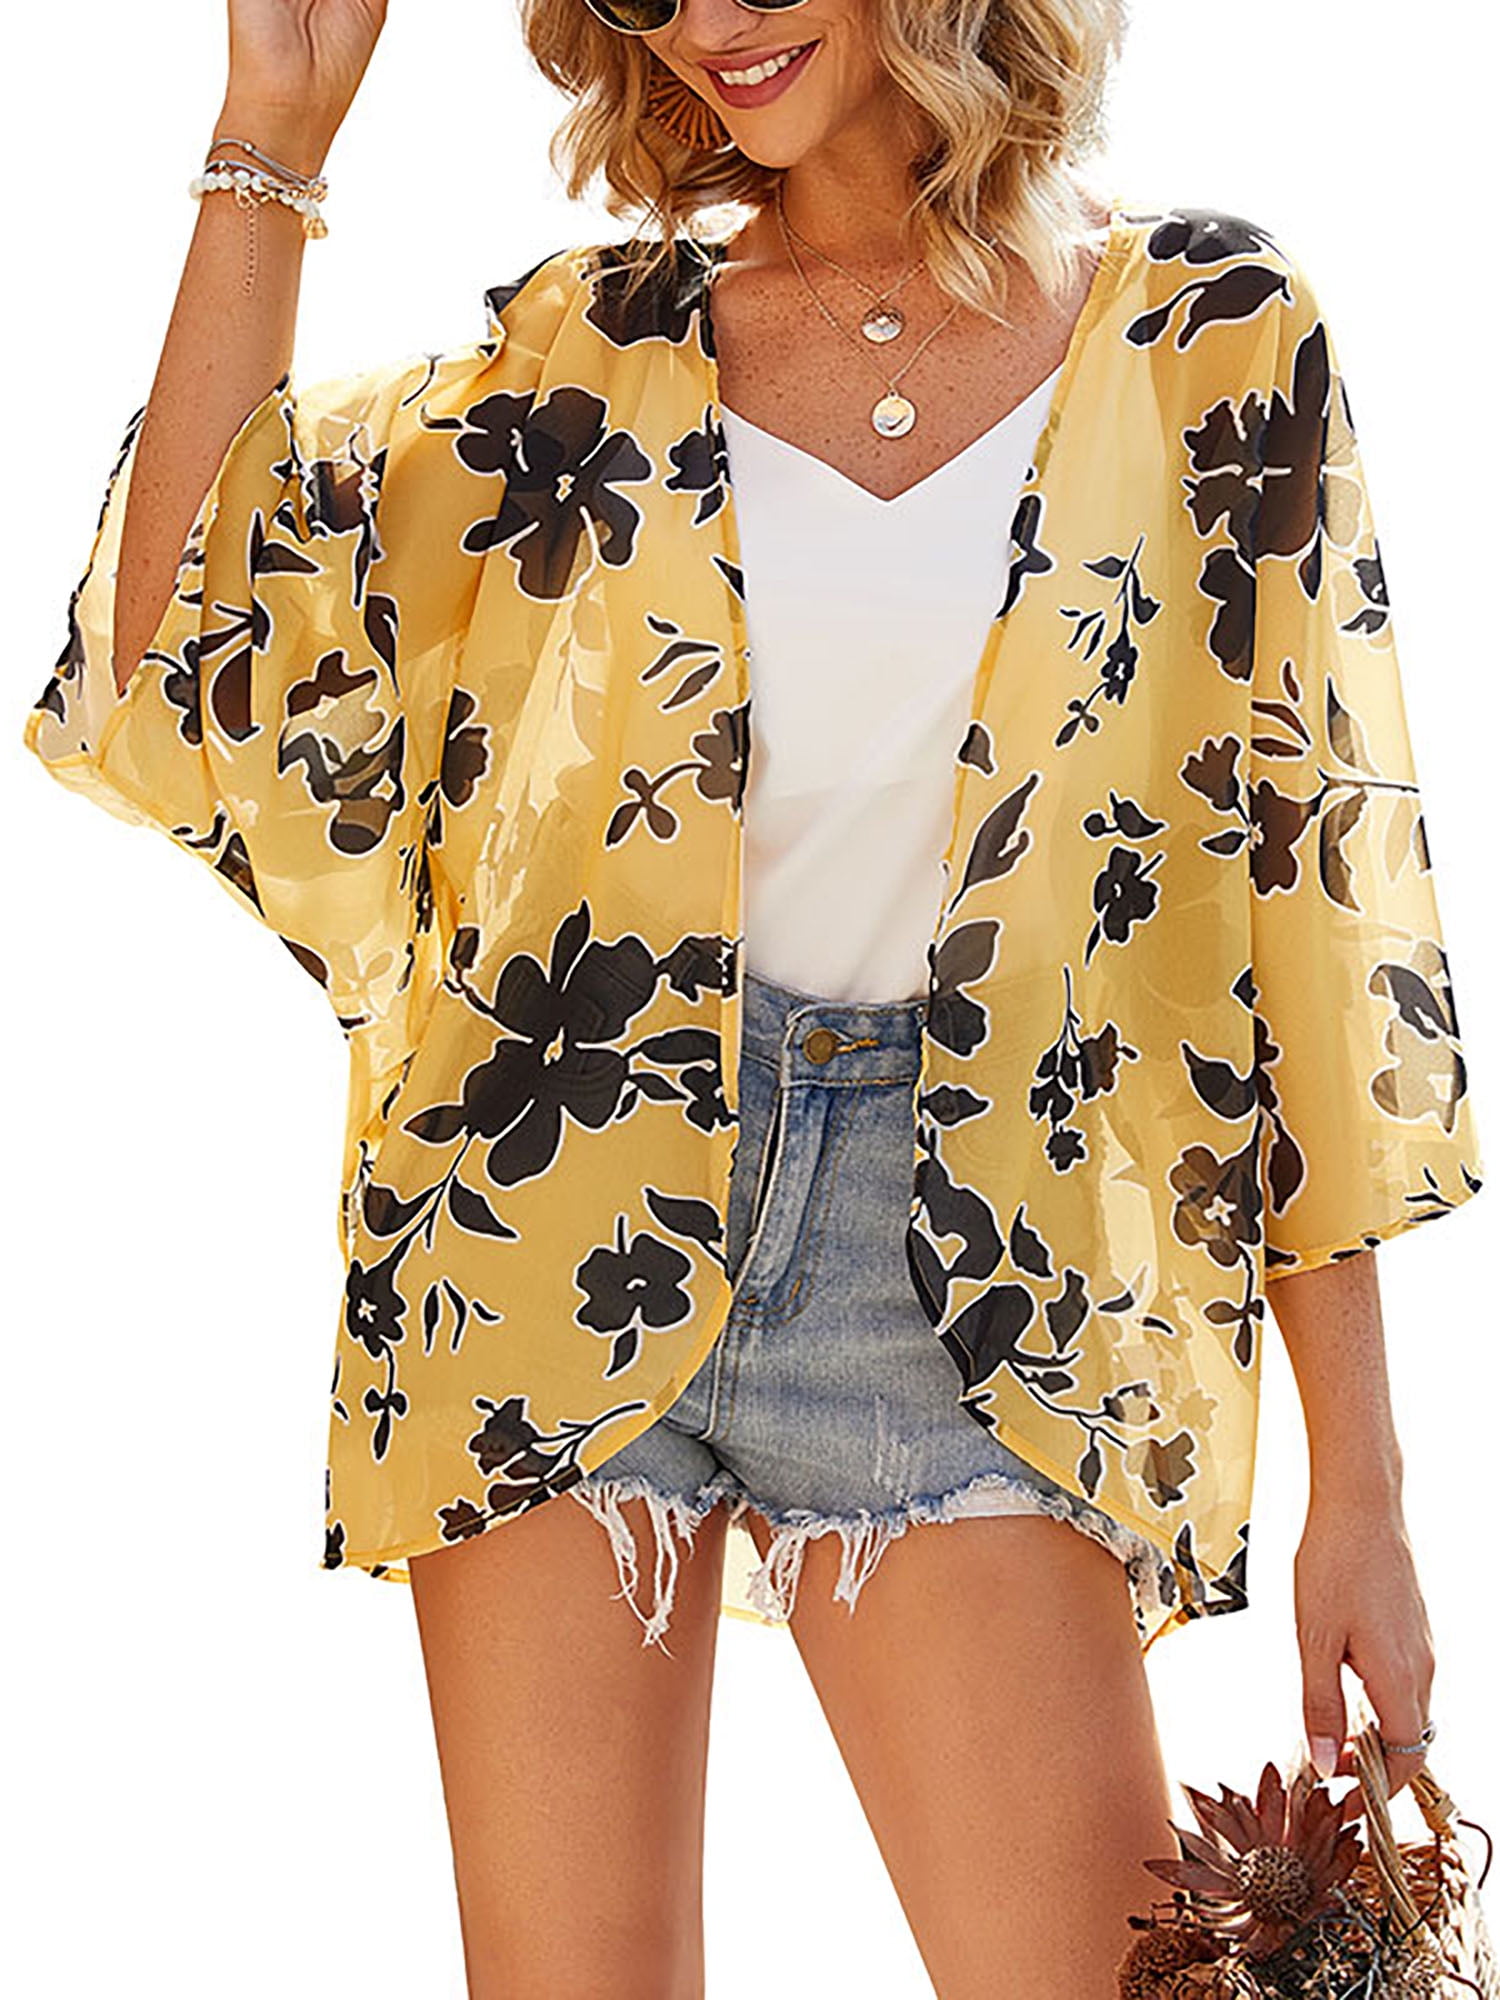 Heynino Womens Chiffon Kimono Cardigans Open Front Floral Print Beach Cover up Capes Sheer Loose Blouse Tops